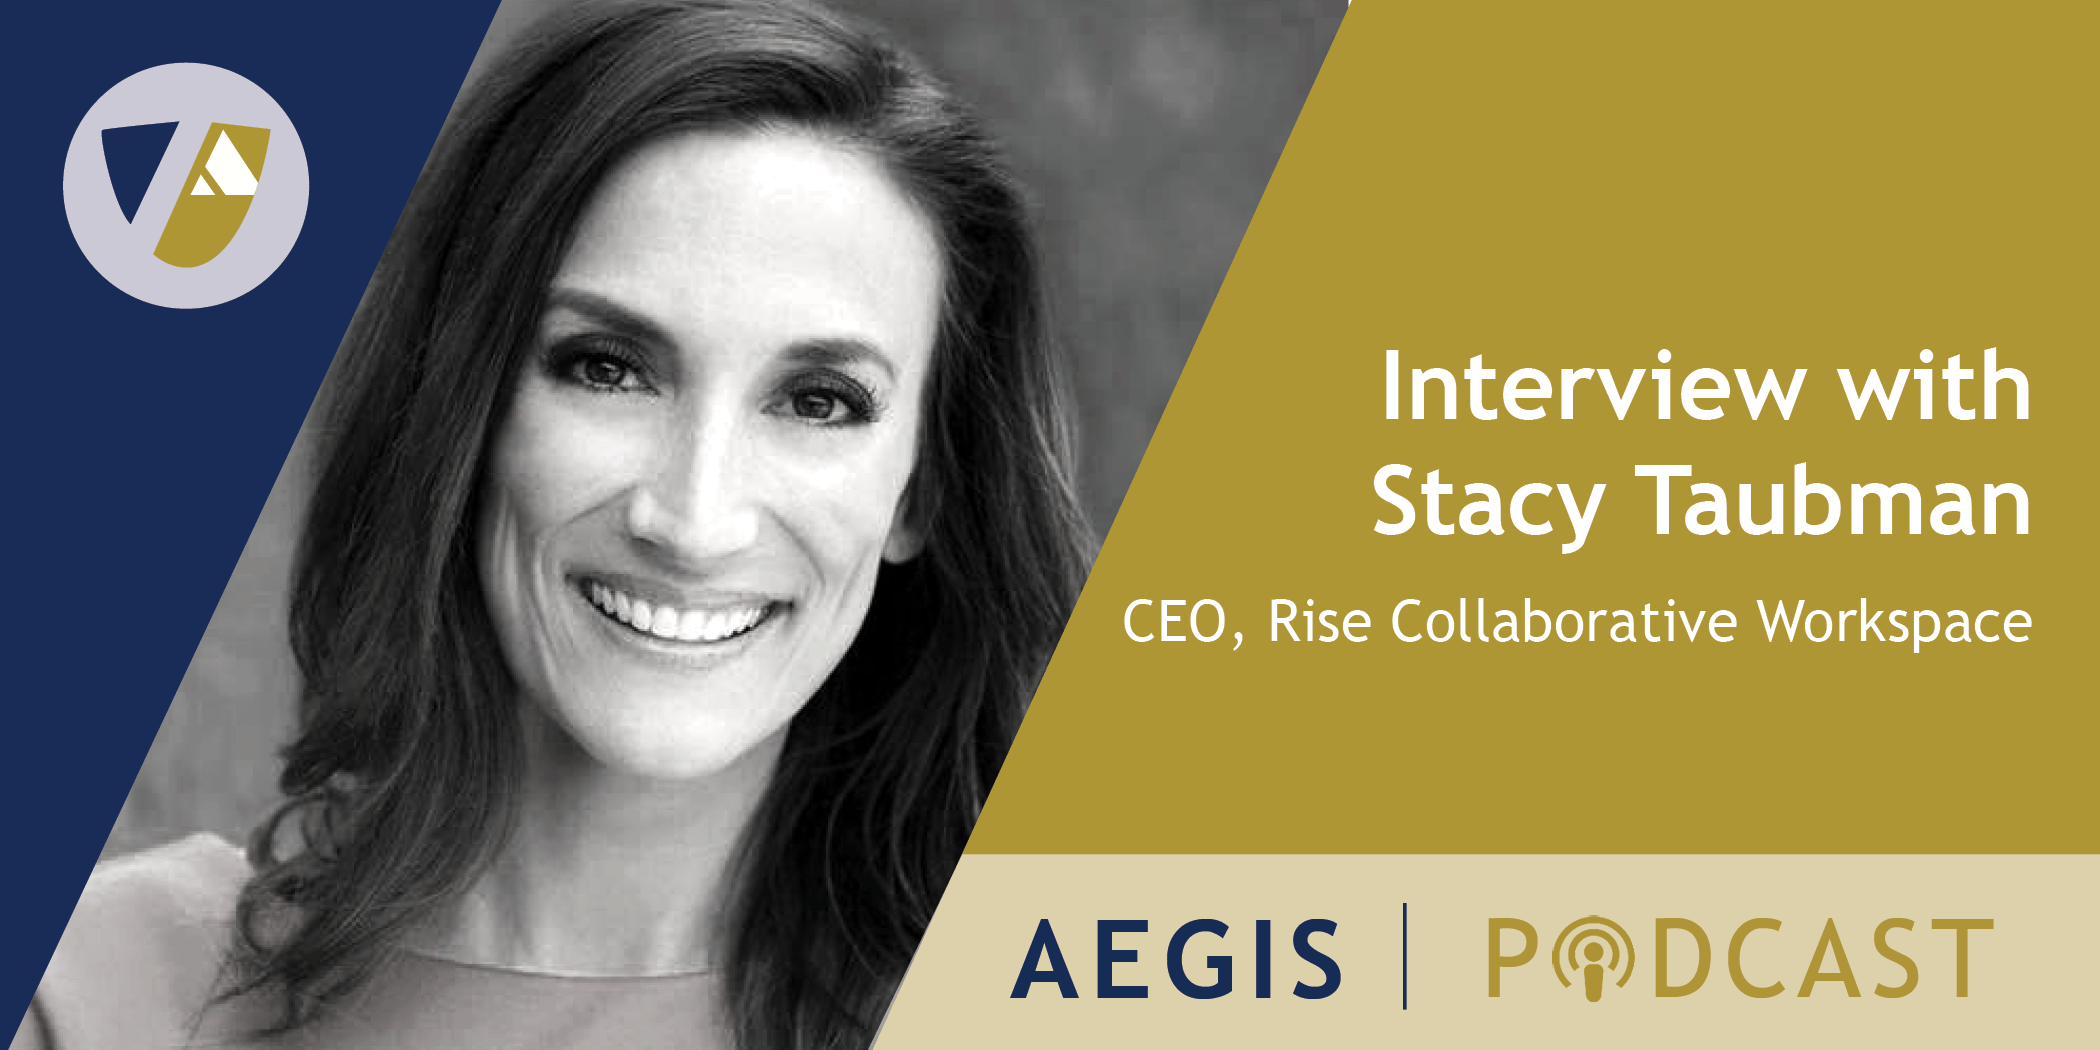 The AEGIS Podcast: Interview with Stacy Taubman, CEO: Rise Collaborative Workspace